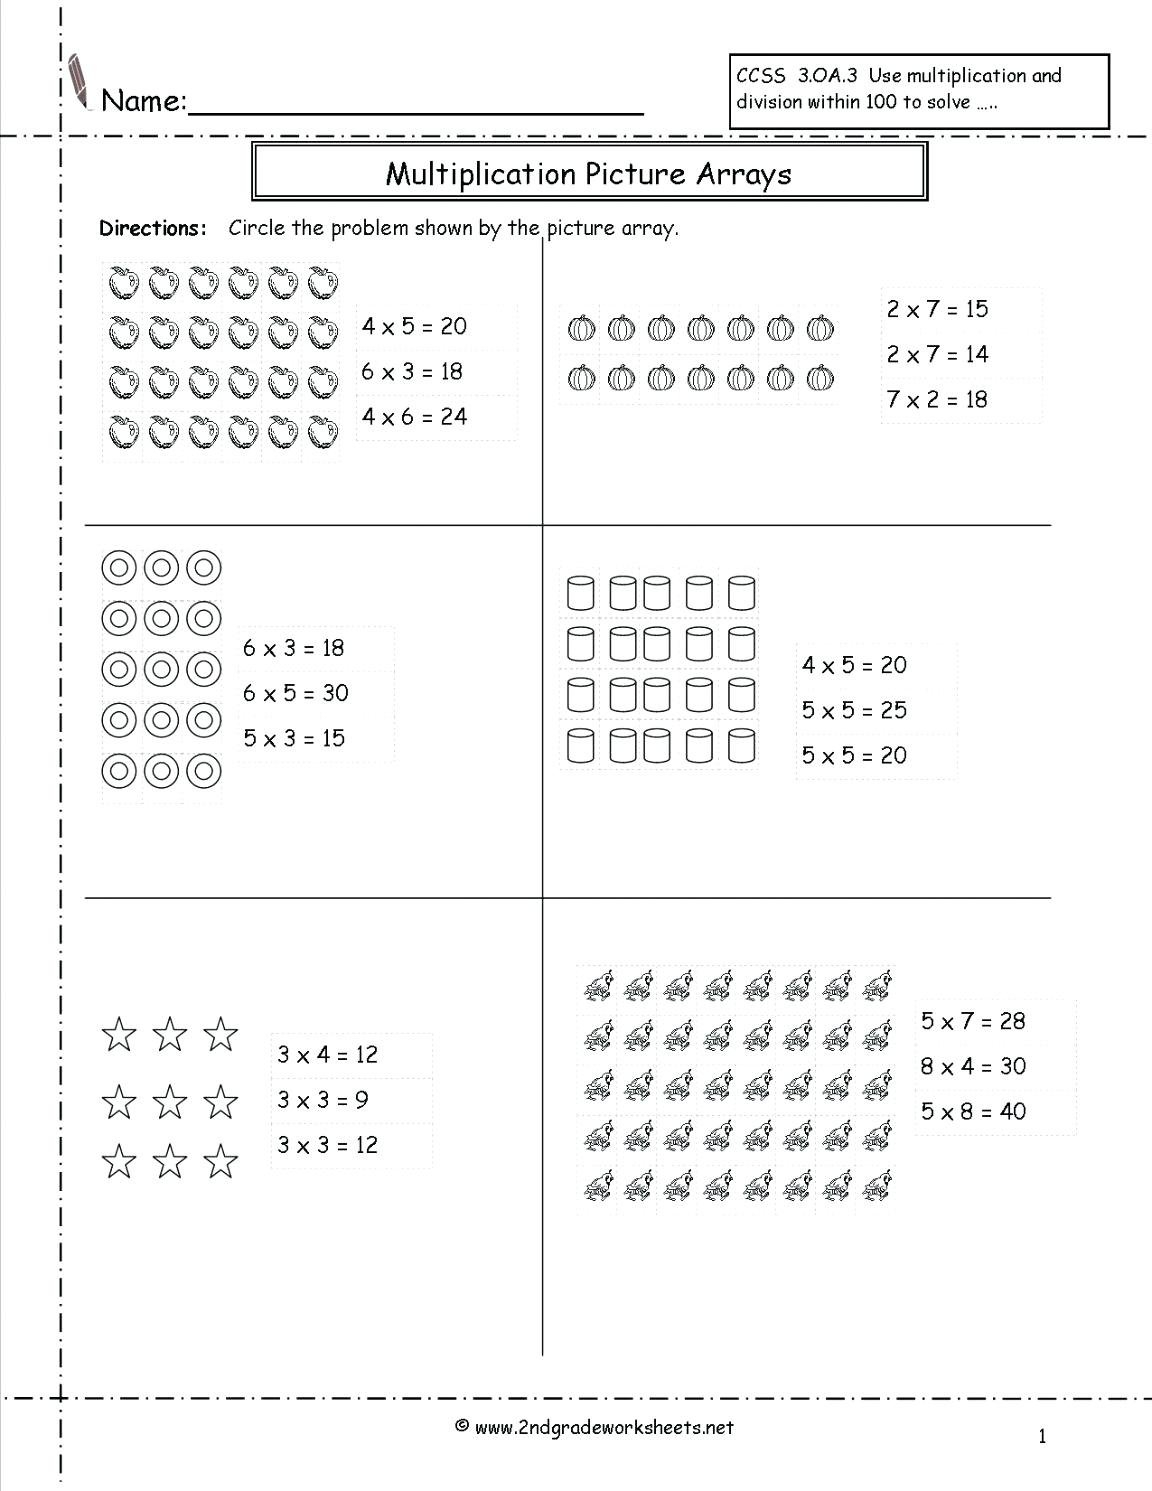 Addition Meaning And Properties Math Properties Of Multiplication With Properties Of Addition Worksheets